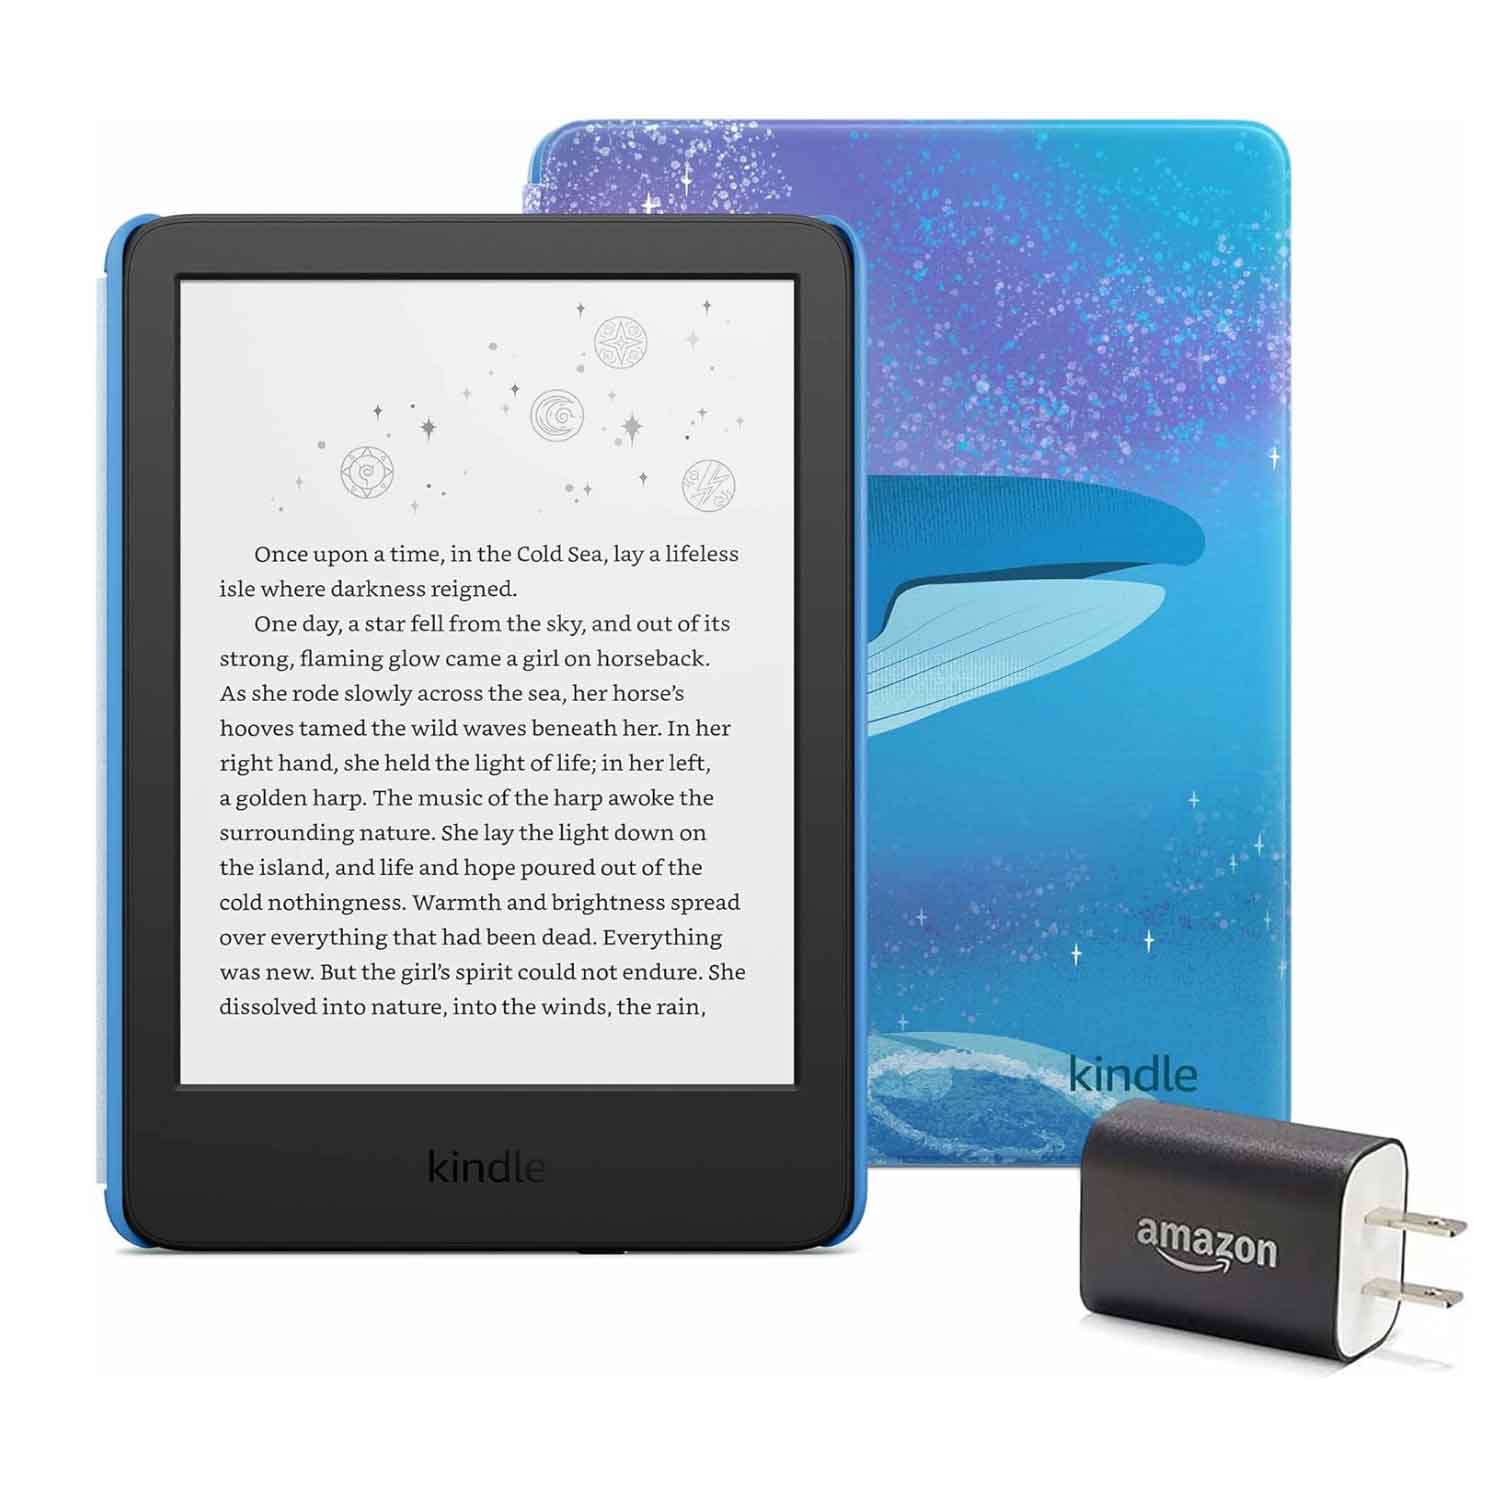 Front and back view of kindle with whale image